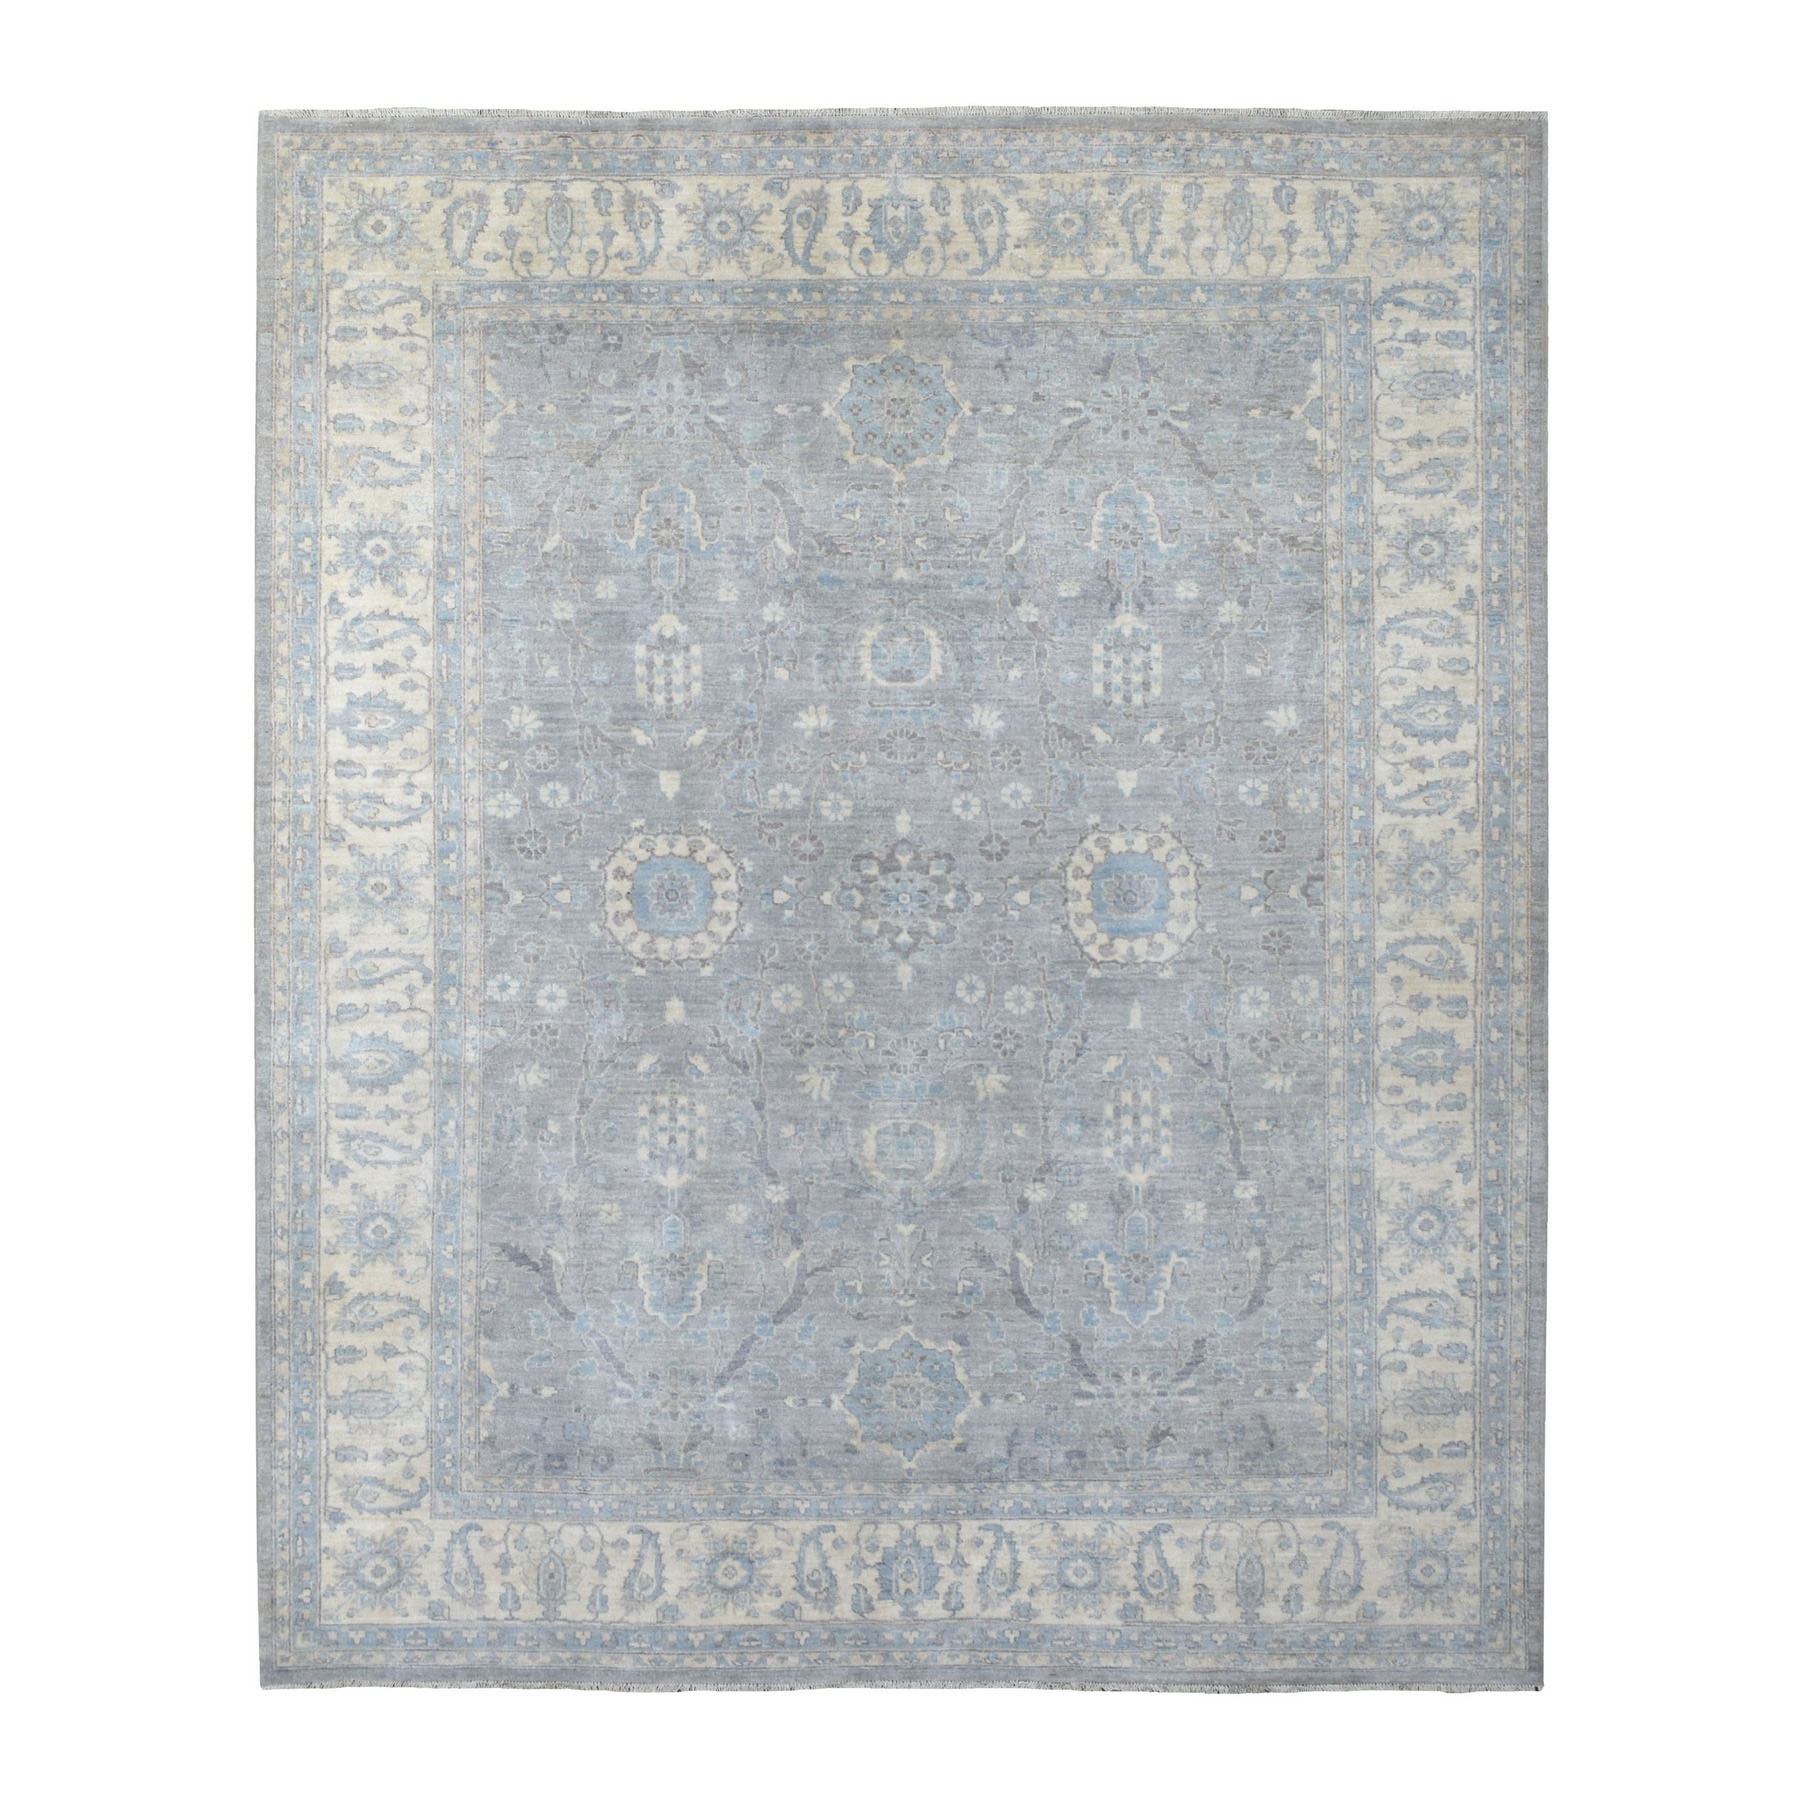 Agra And Turkish Collection Hand Knotted Grey Rug No: 1134760